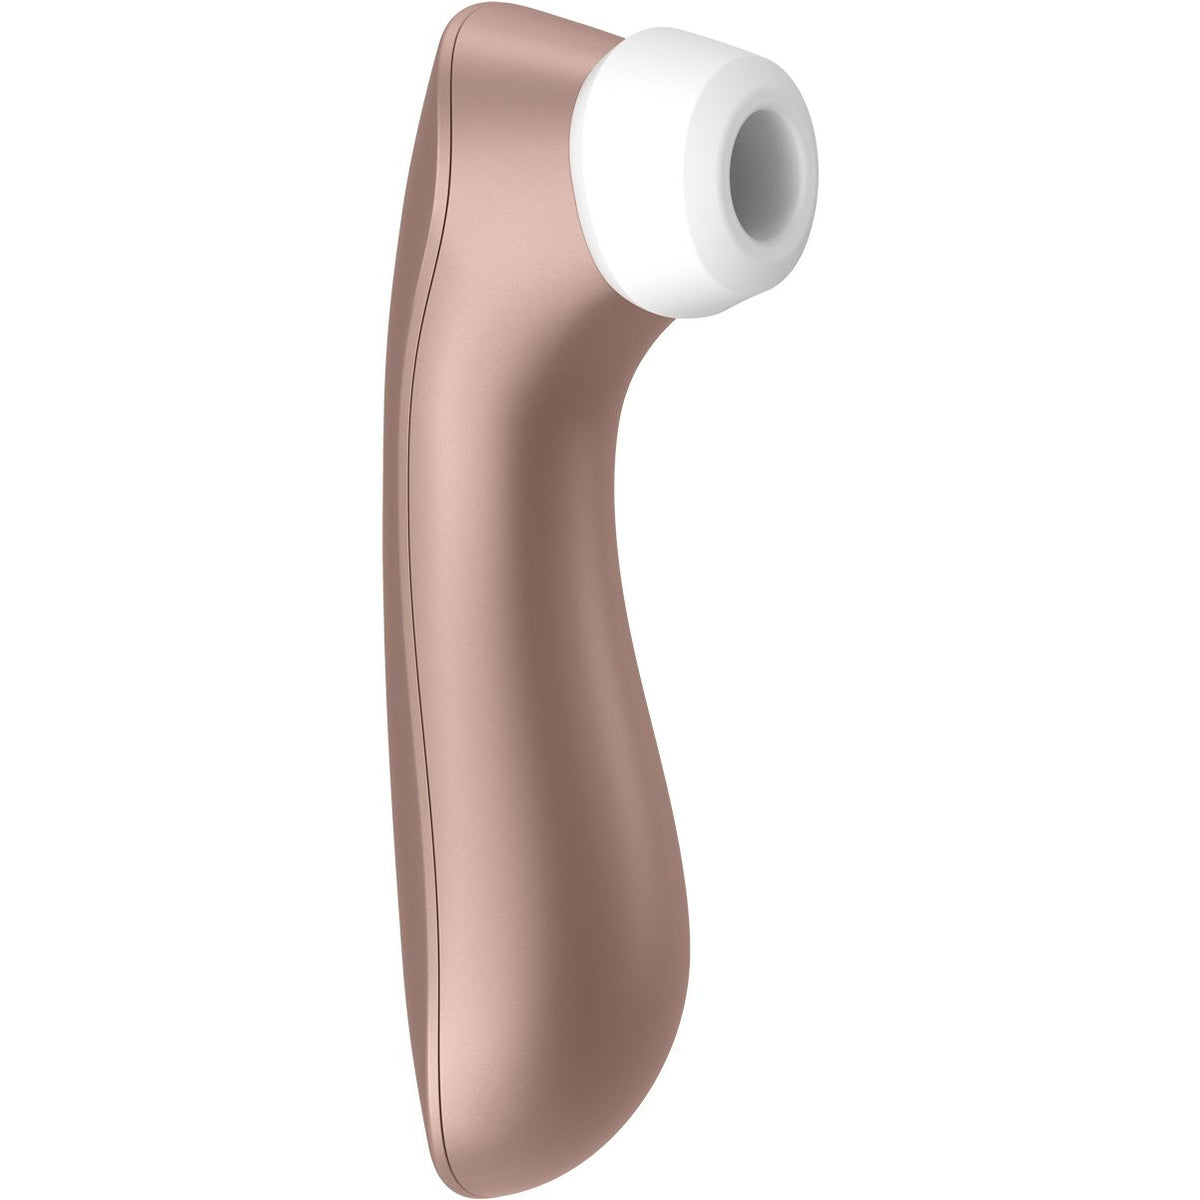 Satisfyer Pro 2+ – Clitoral Air Pulse Vibrator – Brown